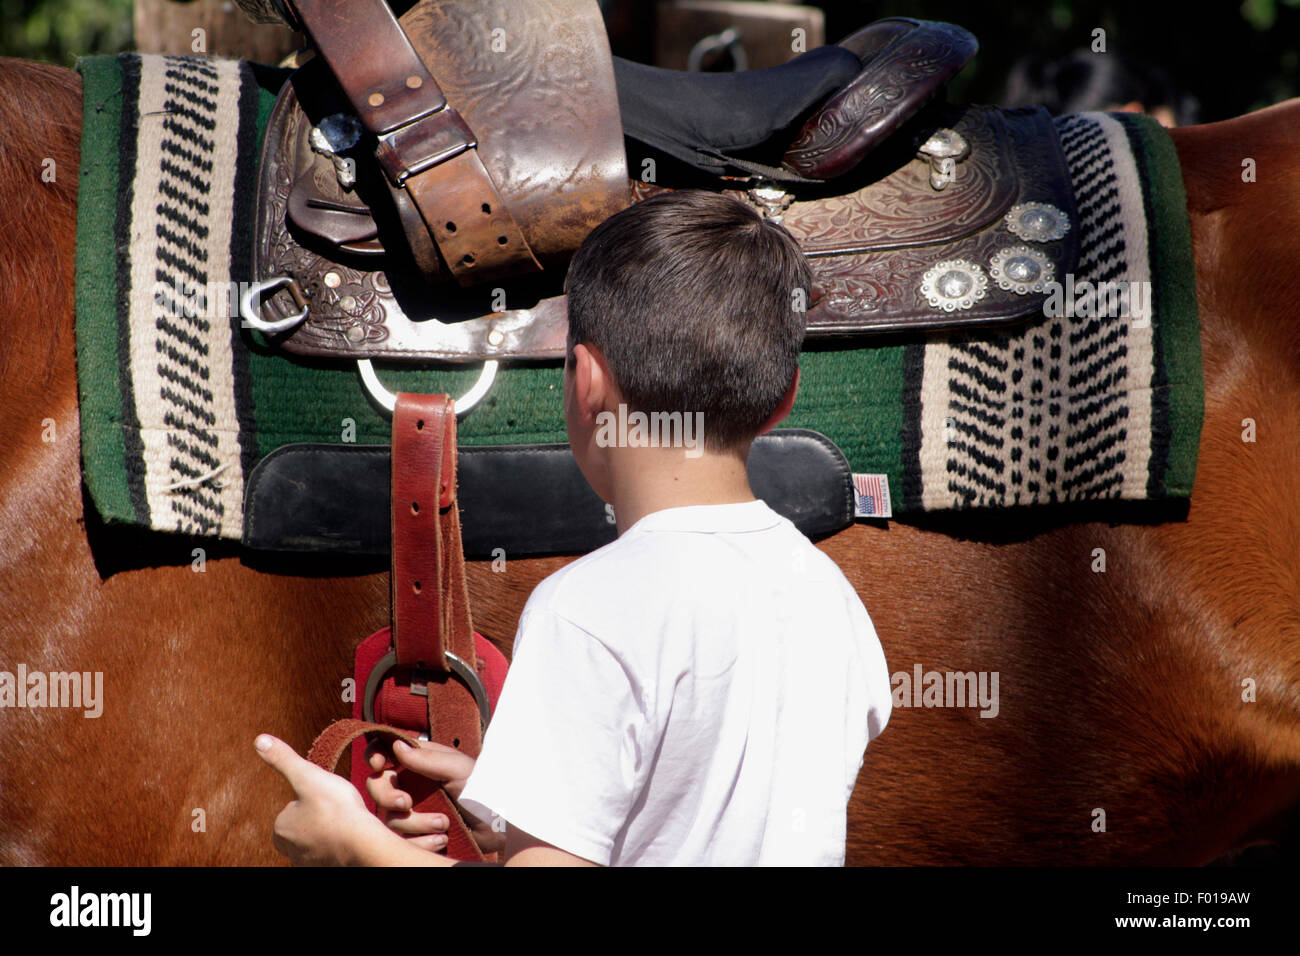 Boy Cinching and Securing Saddle on Chestnut Horse Preparing to Ride Stock Photo